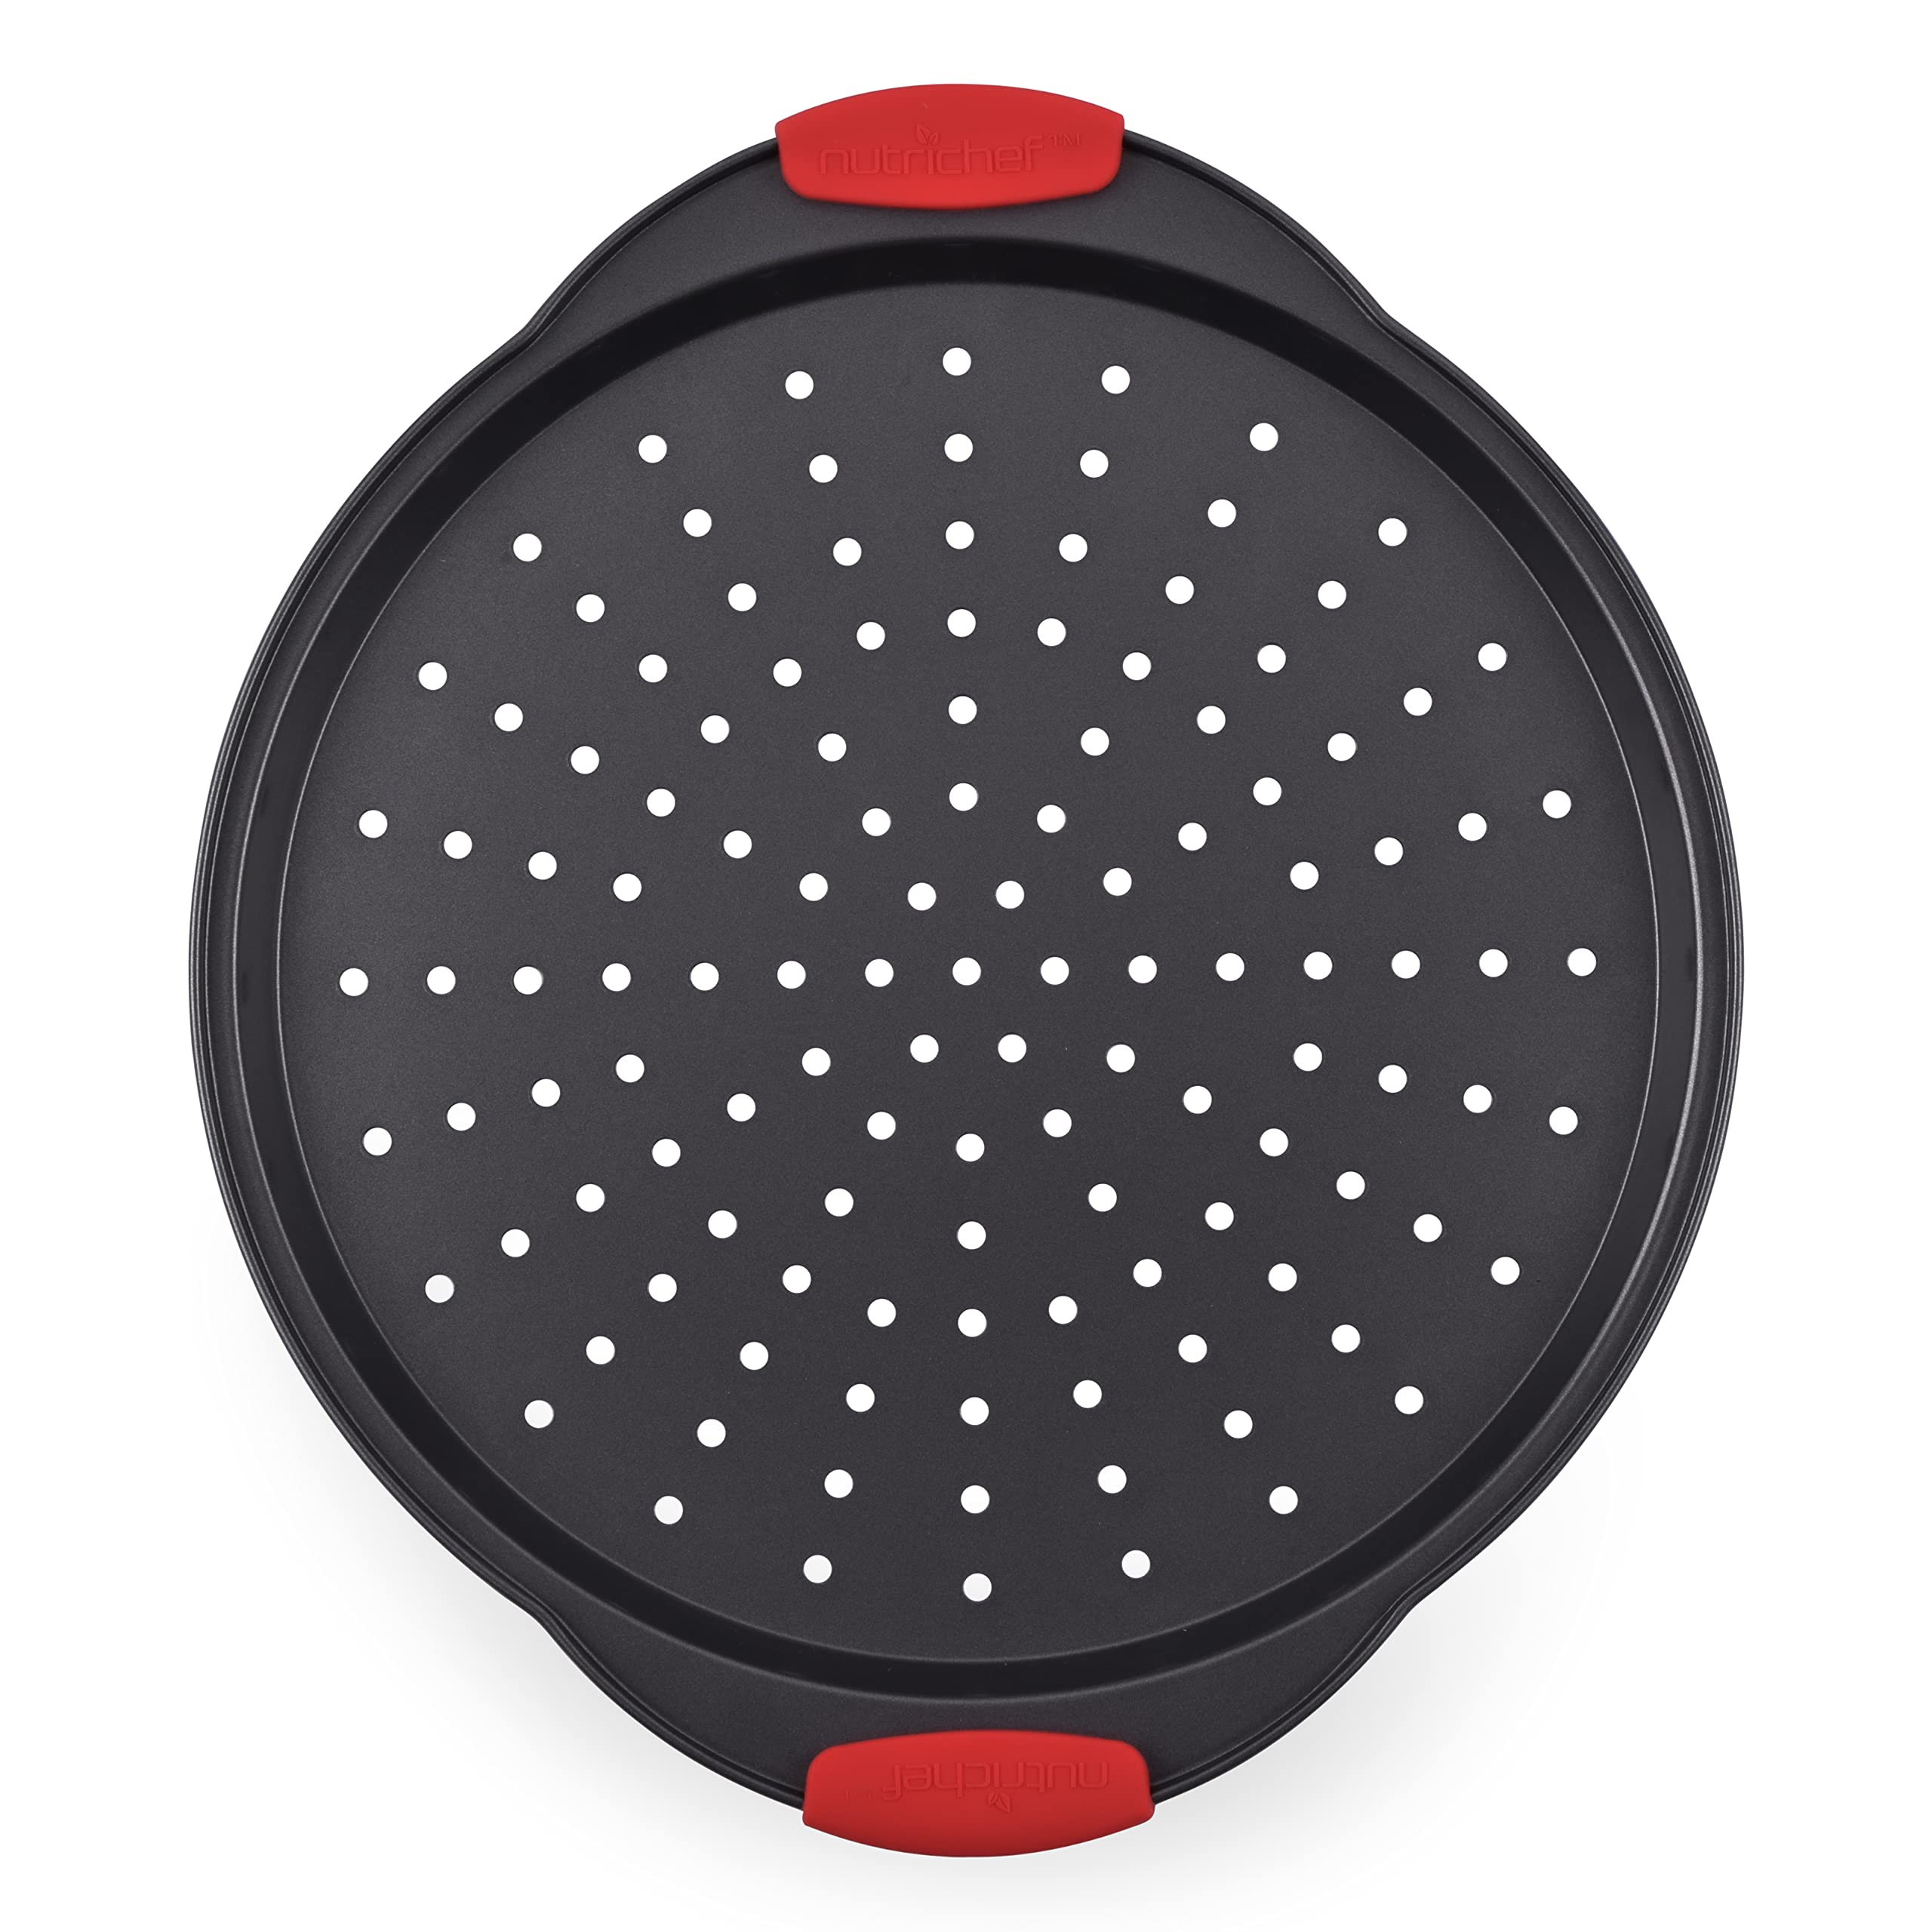 NutriChef Non-Stick Pizza Tray - with Silicone Handle, Round Steel Non-stick Pan with Perforated Holes, Premium Bakeware, Pizza Tray with Silicone and Oversized Handle, Dishwasher Safe - NCBPIZ6